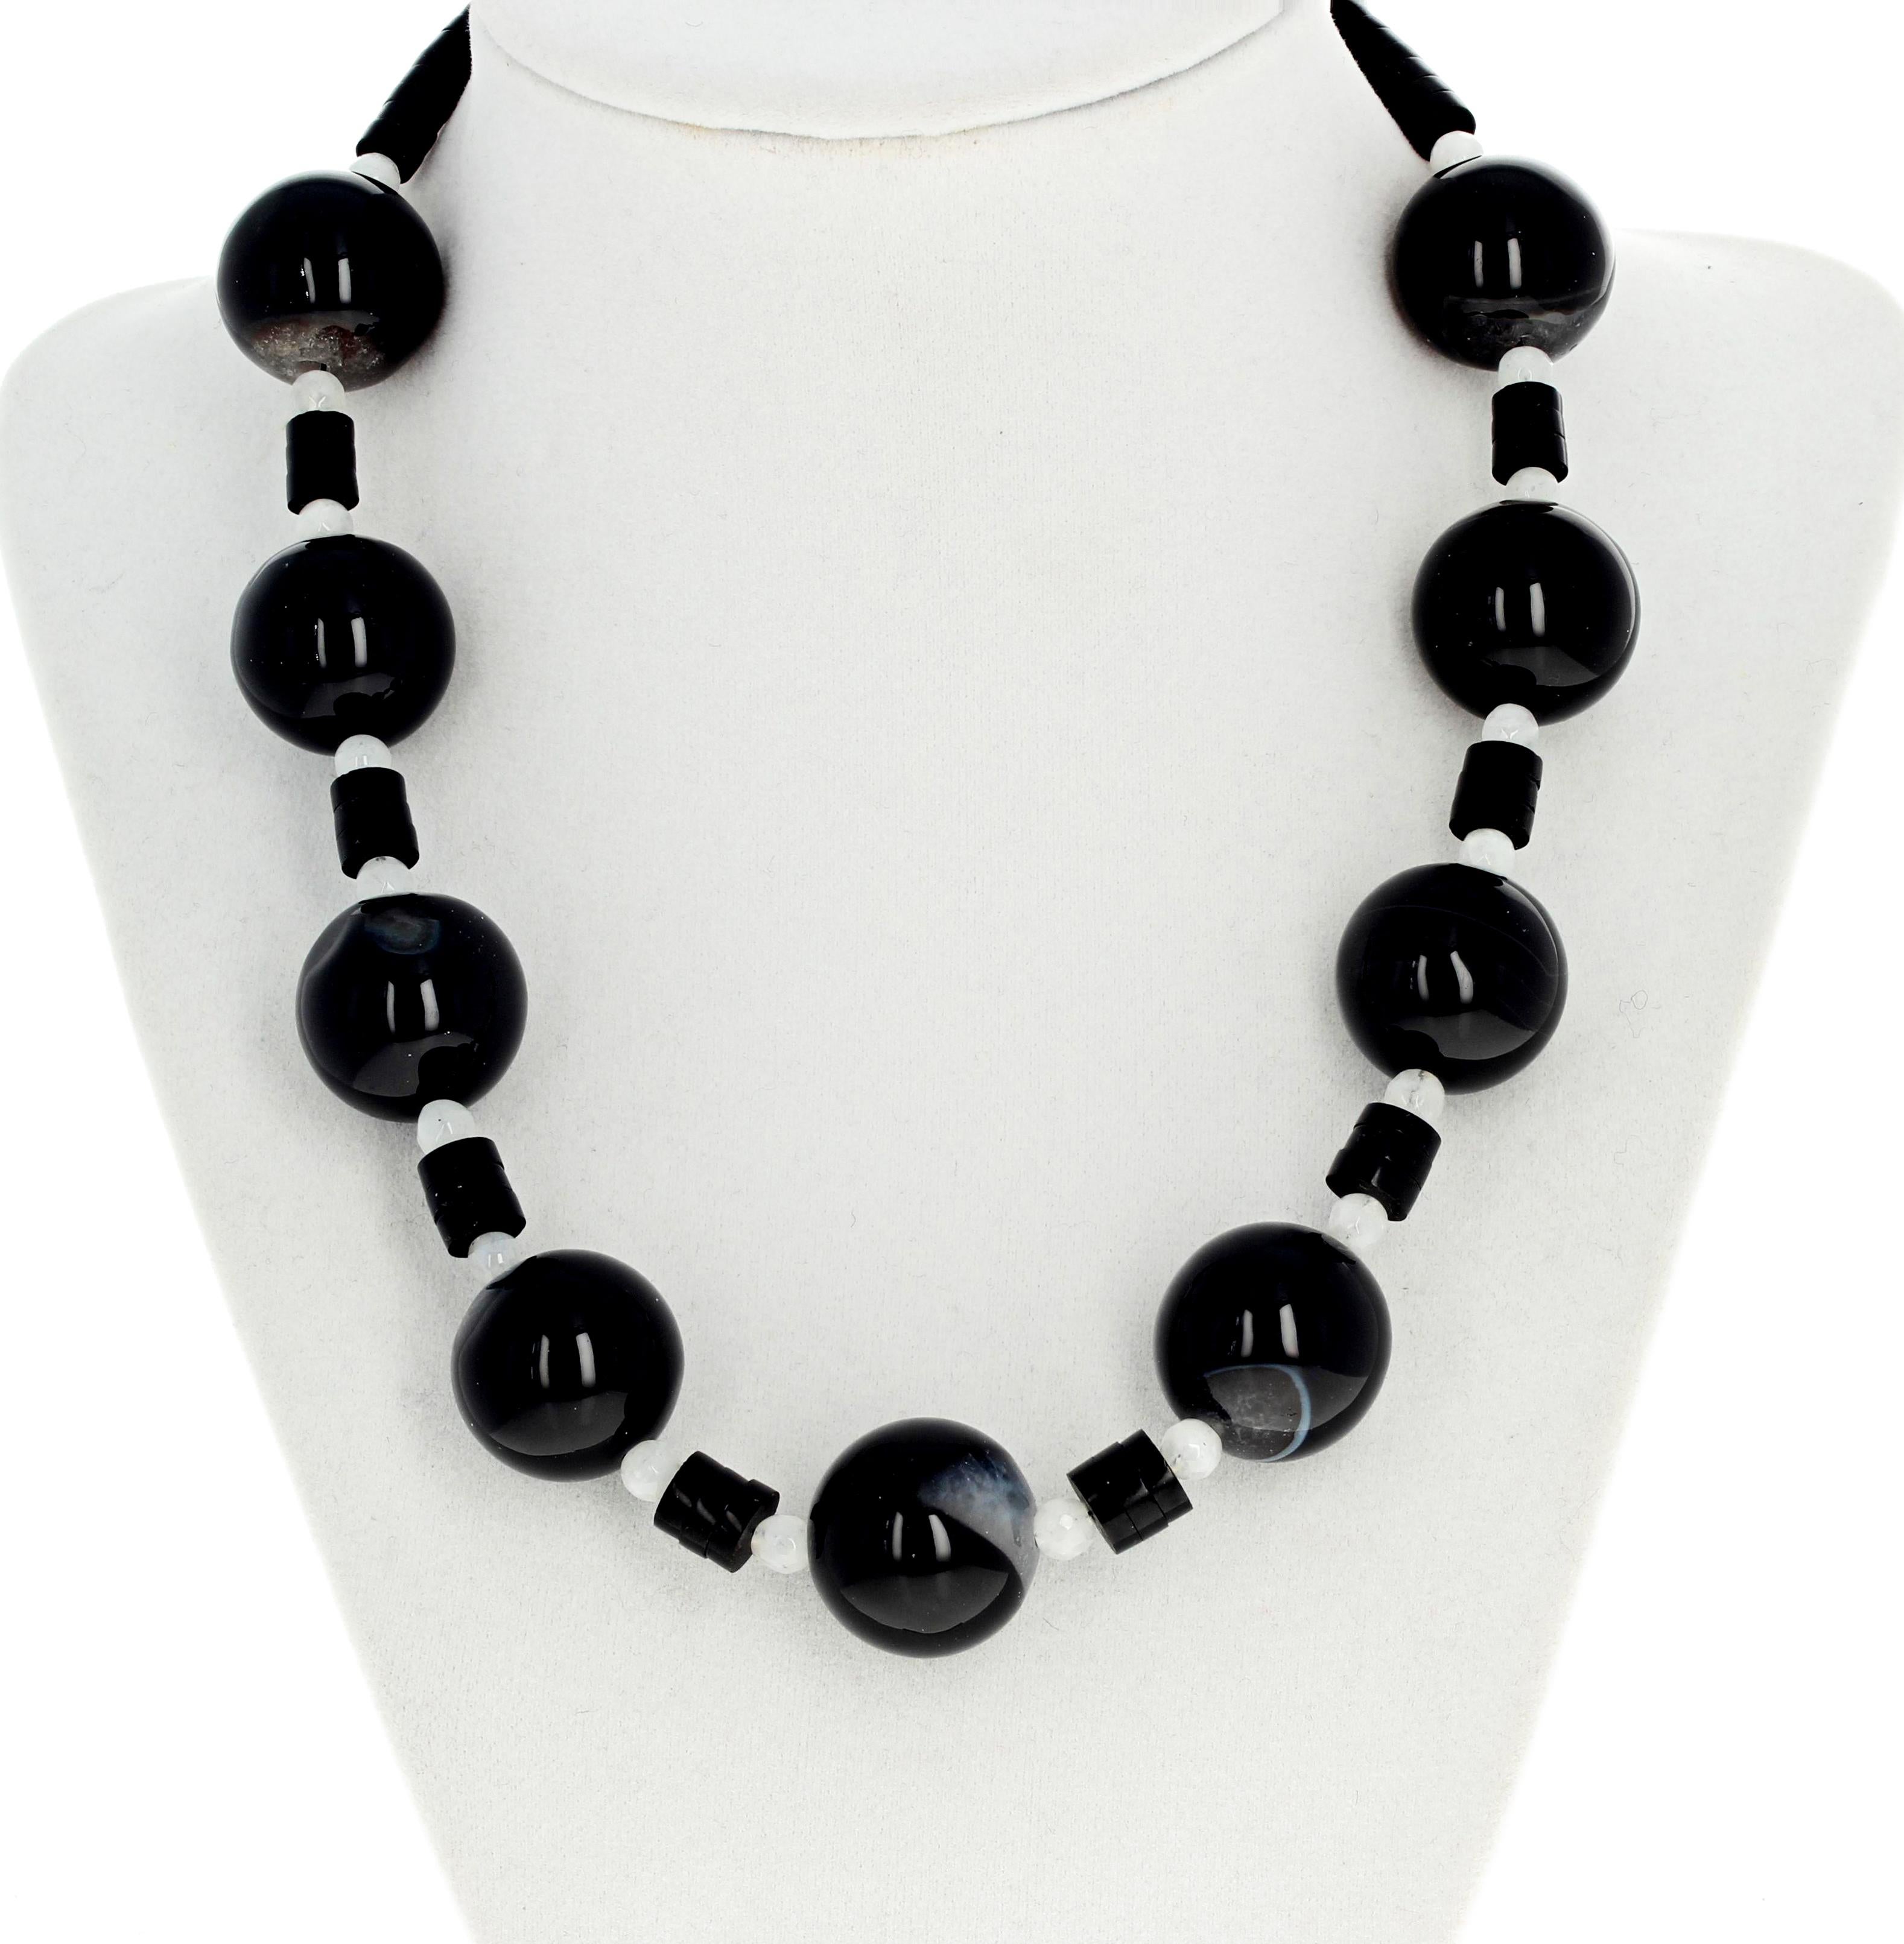 Highly polished glowing black and white Agate gemstones (18 mm) enhanced with unique shining  round slices of black Jet (black Amber) and glowing white checkerboard gemcut Moonstones all make up this gorgeous 17 1/2 inch necklace.  This is truly